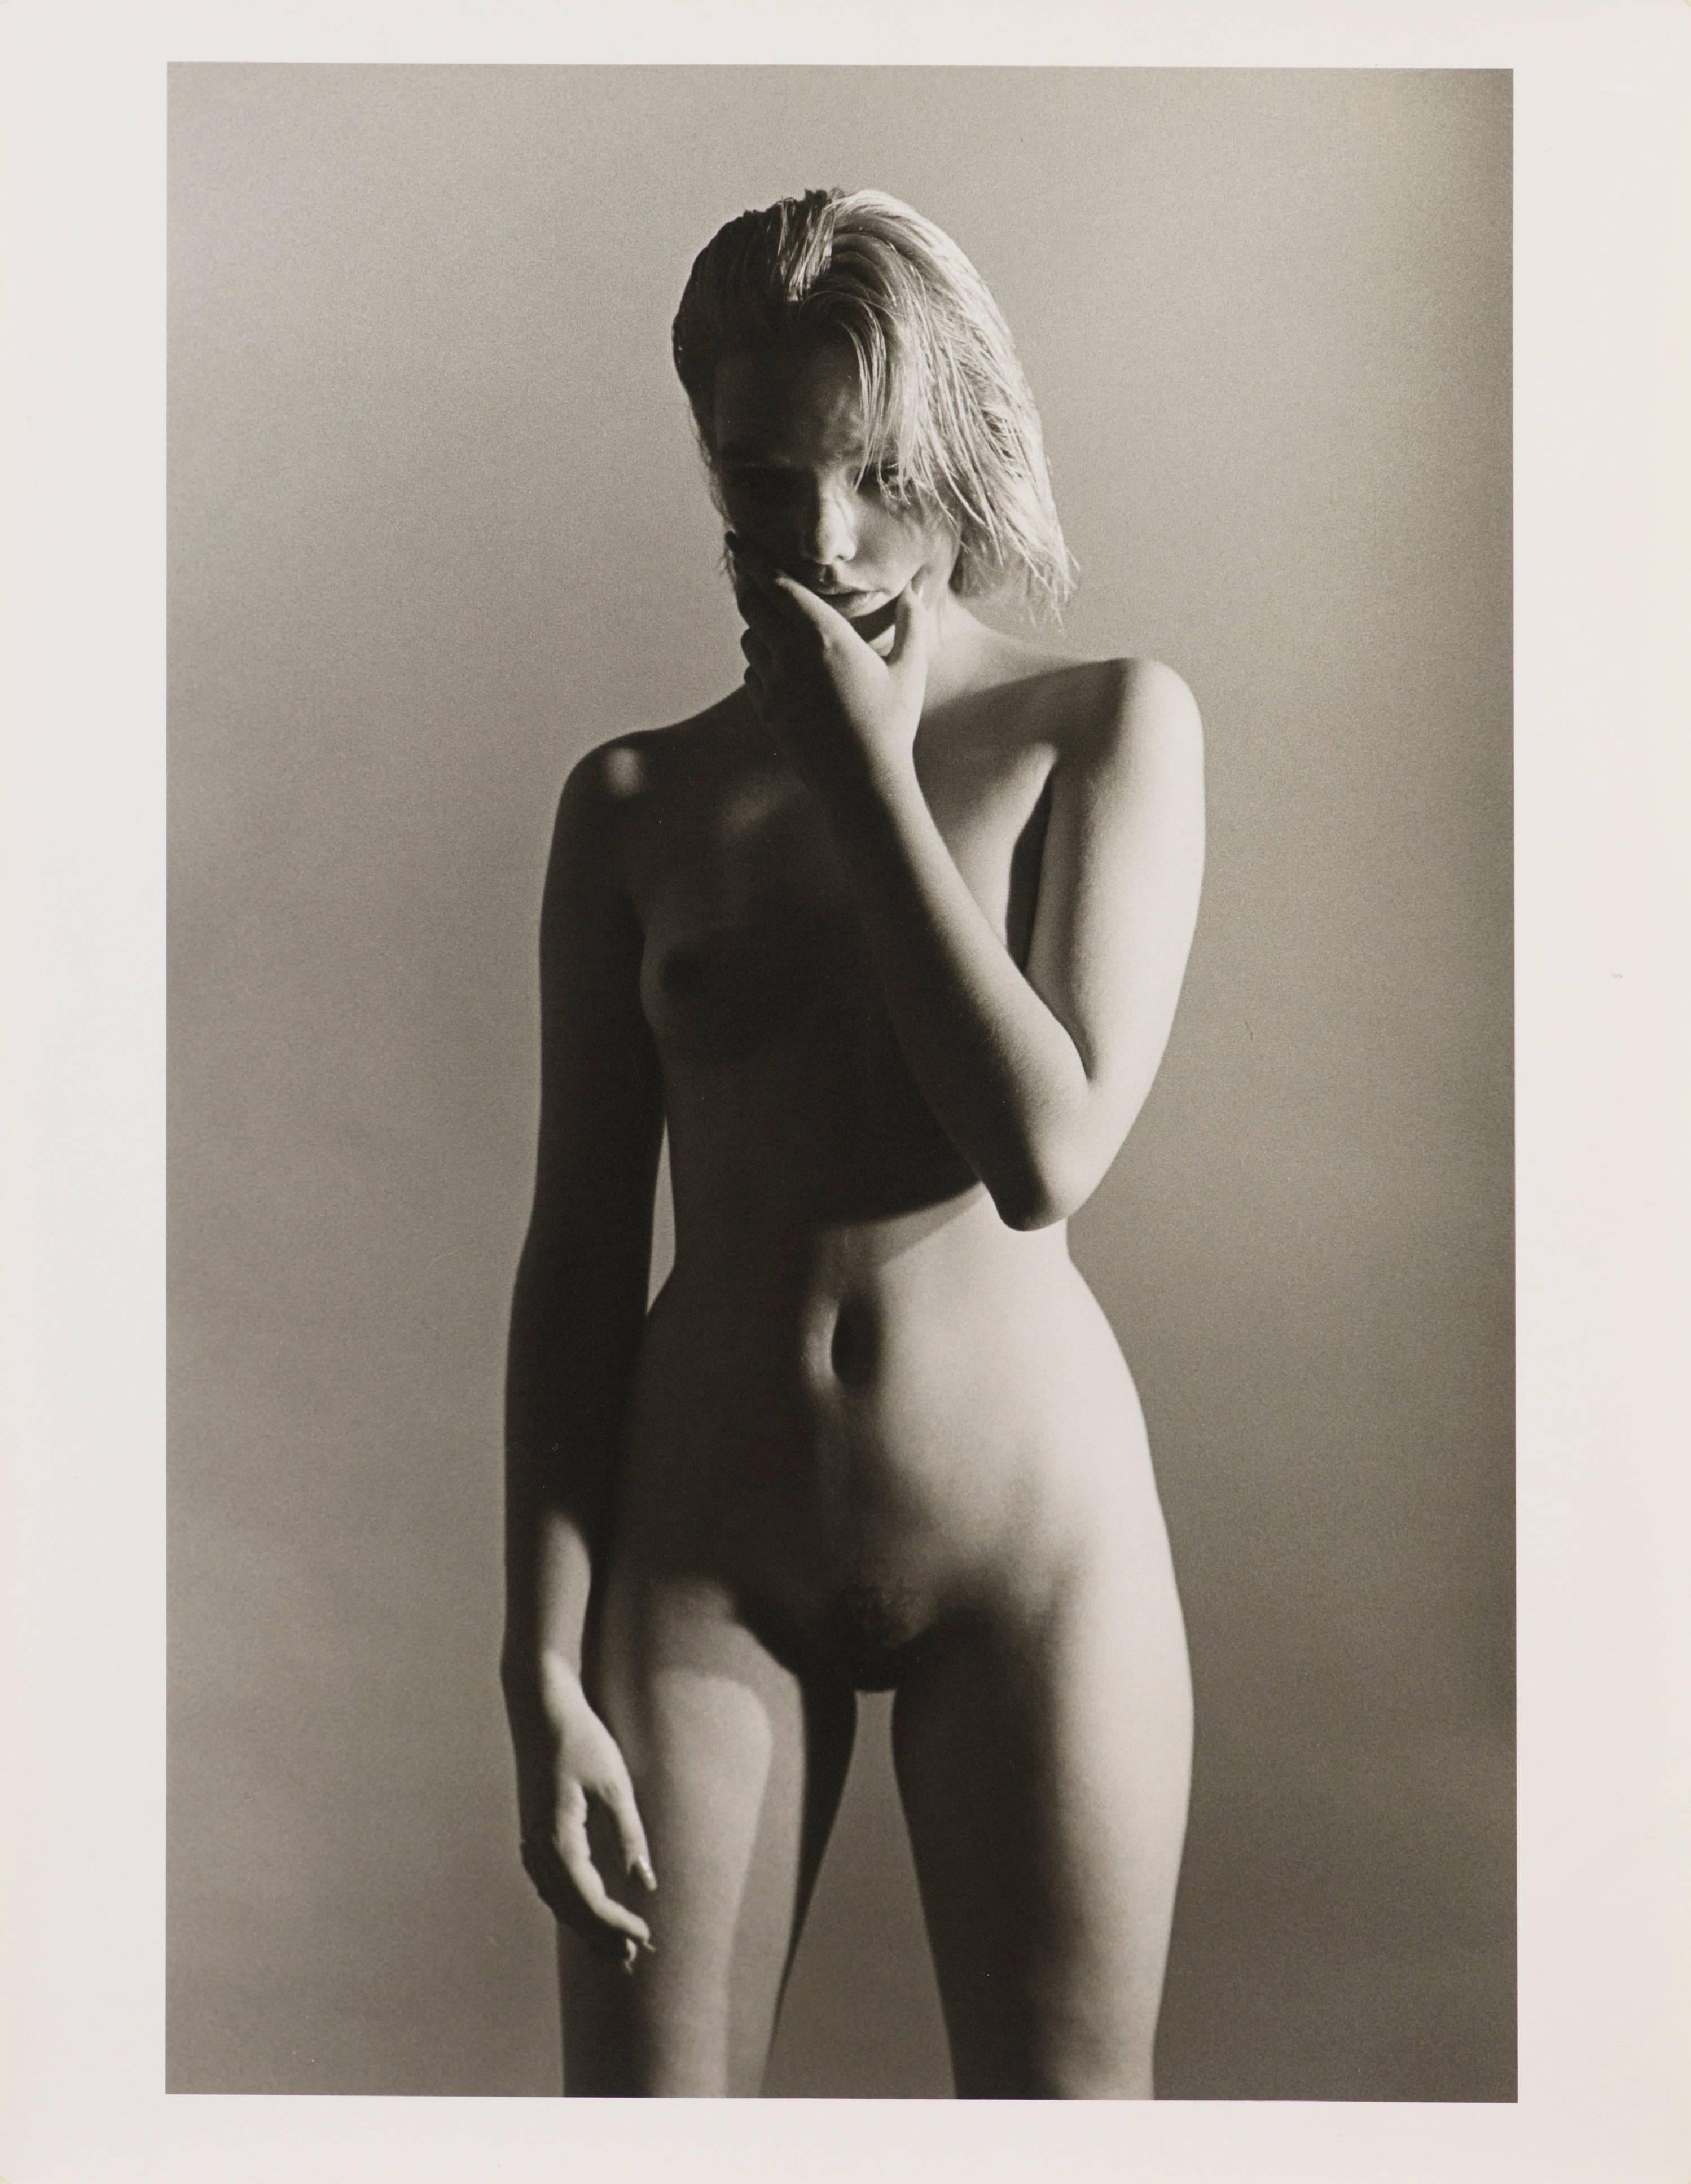 Stephan Lupino Black and White Photograph - Nude by Lupino, New York 1984. Black & white Fashion modern photography